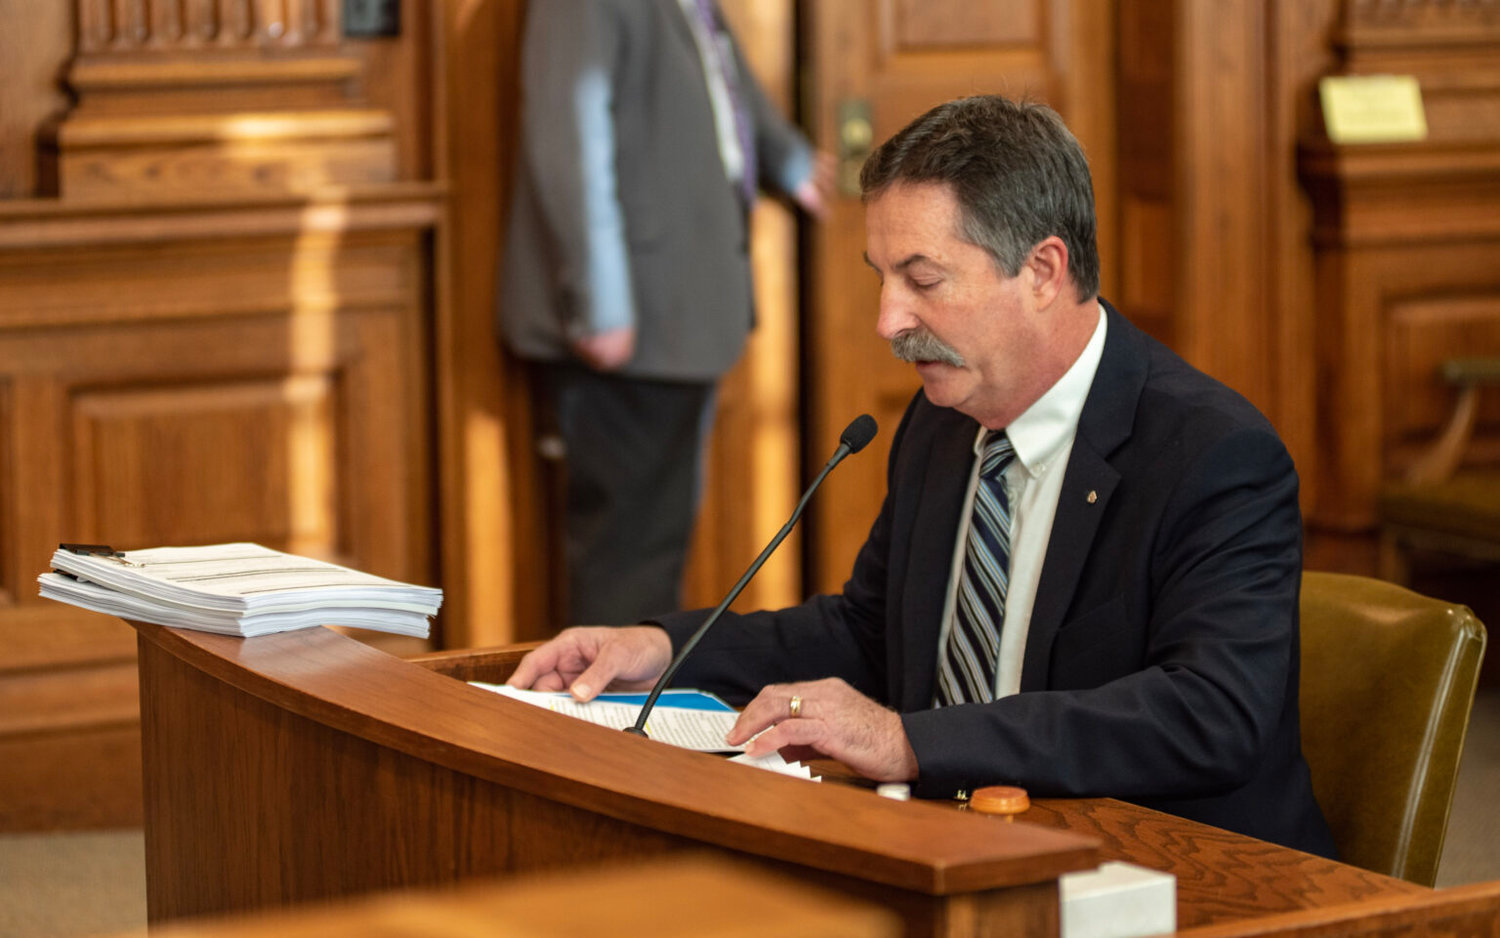 State Sen. Mike Moon, R-Ash Grove, introduces his bill opponents are labeling a "Don't Say Gay" bill before the Senate Education and Workforce Development Committee Tuesday. A thick stack of witness forms sits on the desk.